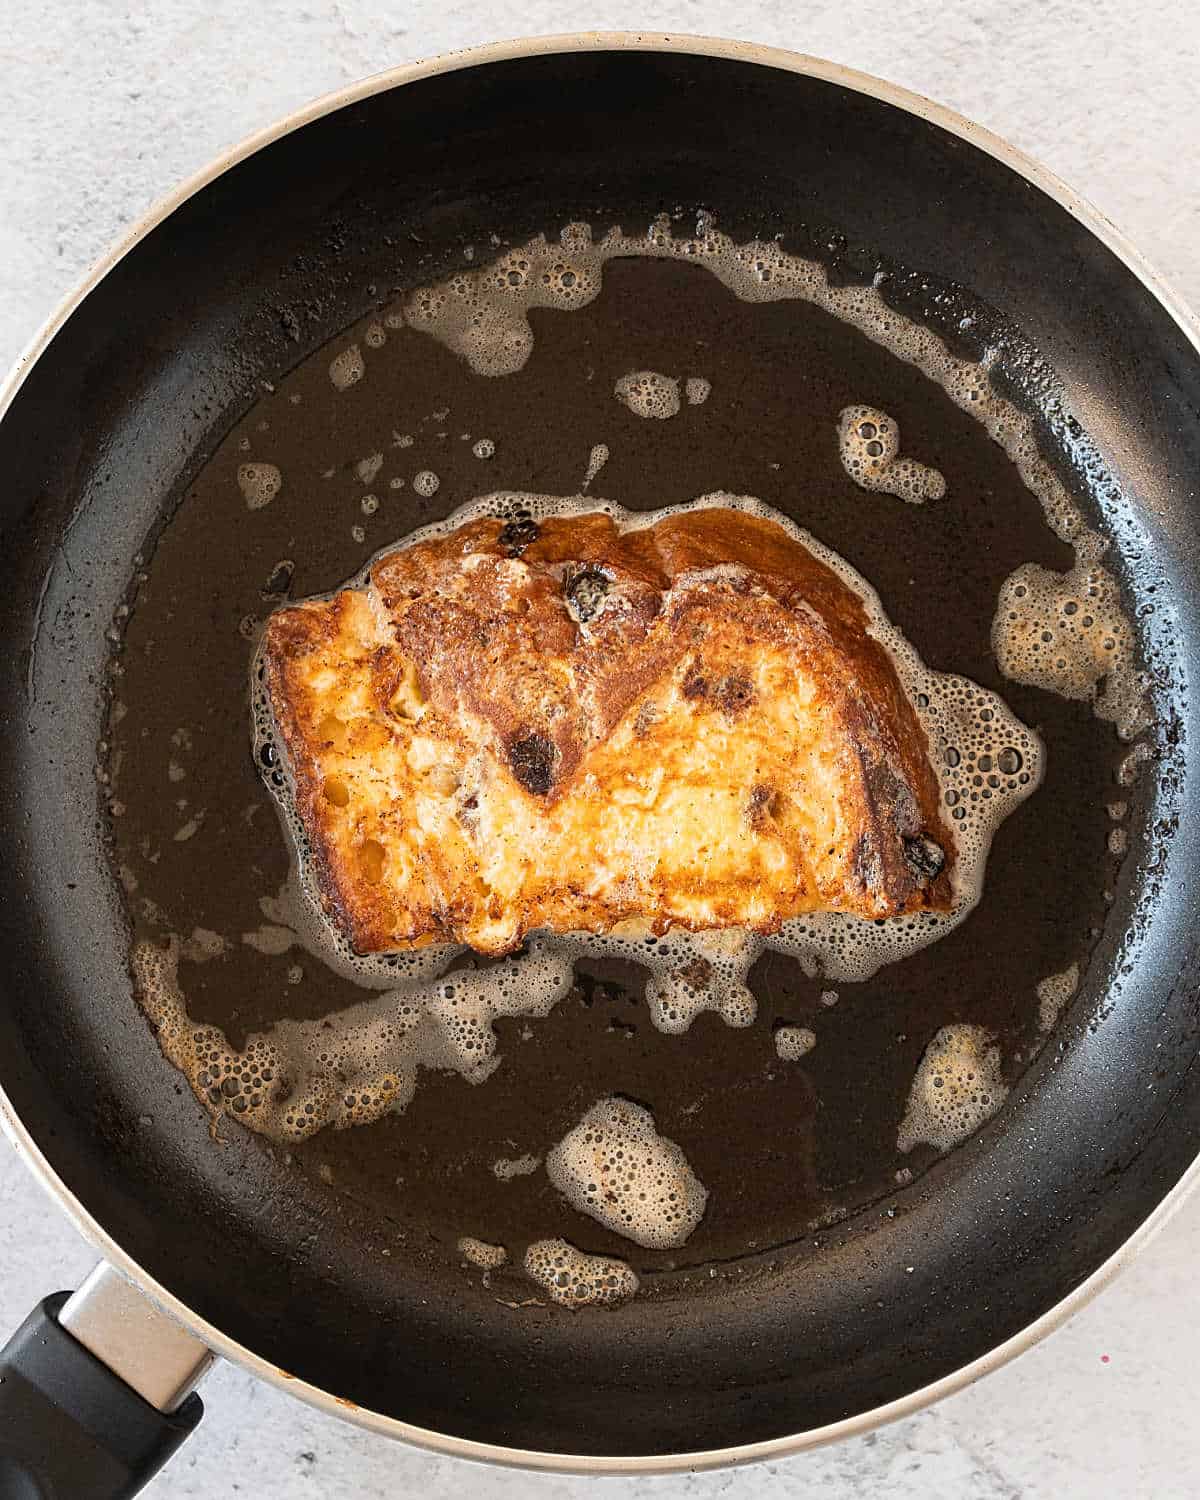 Balck skillet with panettone French toast piece being cooked.